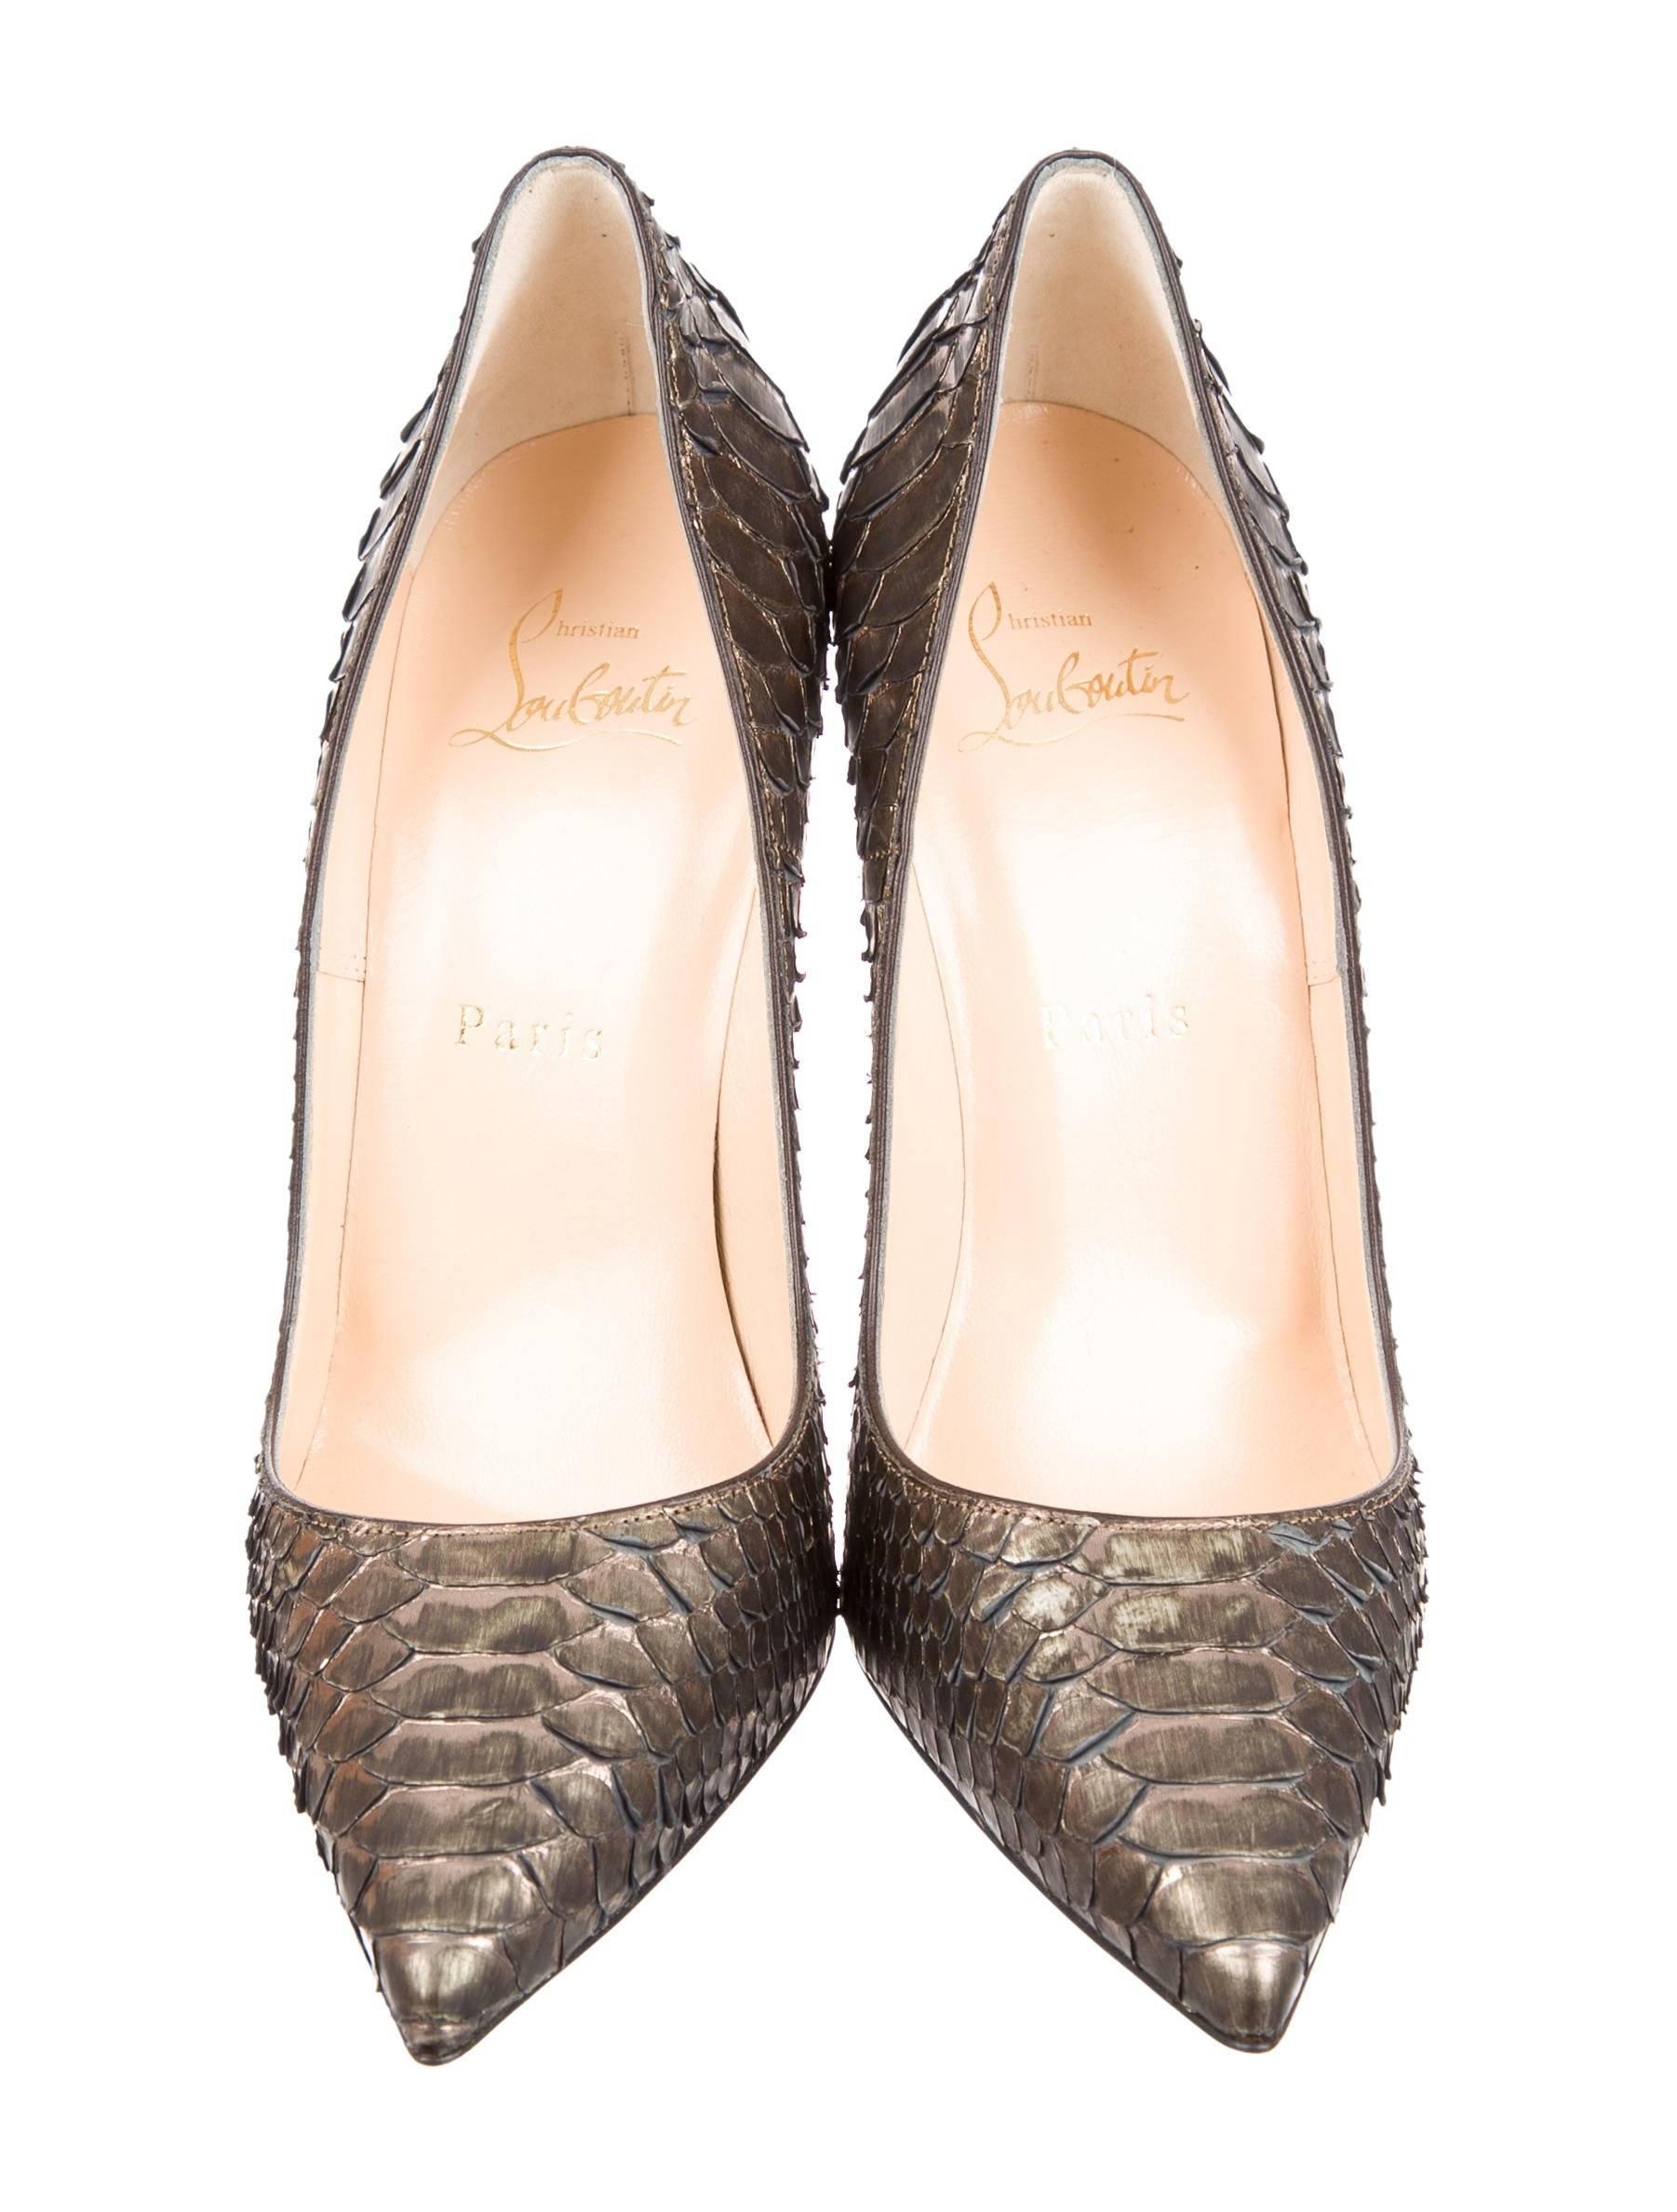 Brown Christian Louboutin New Sold Out Python Snakeskin So Kate High Heels Pumps W/Box